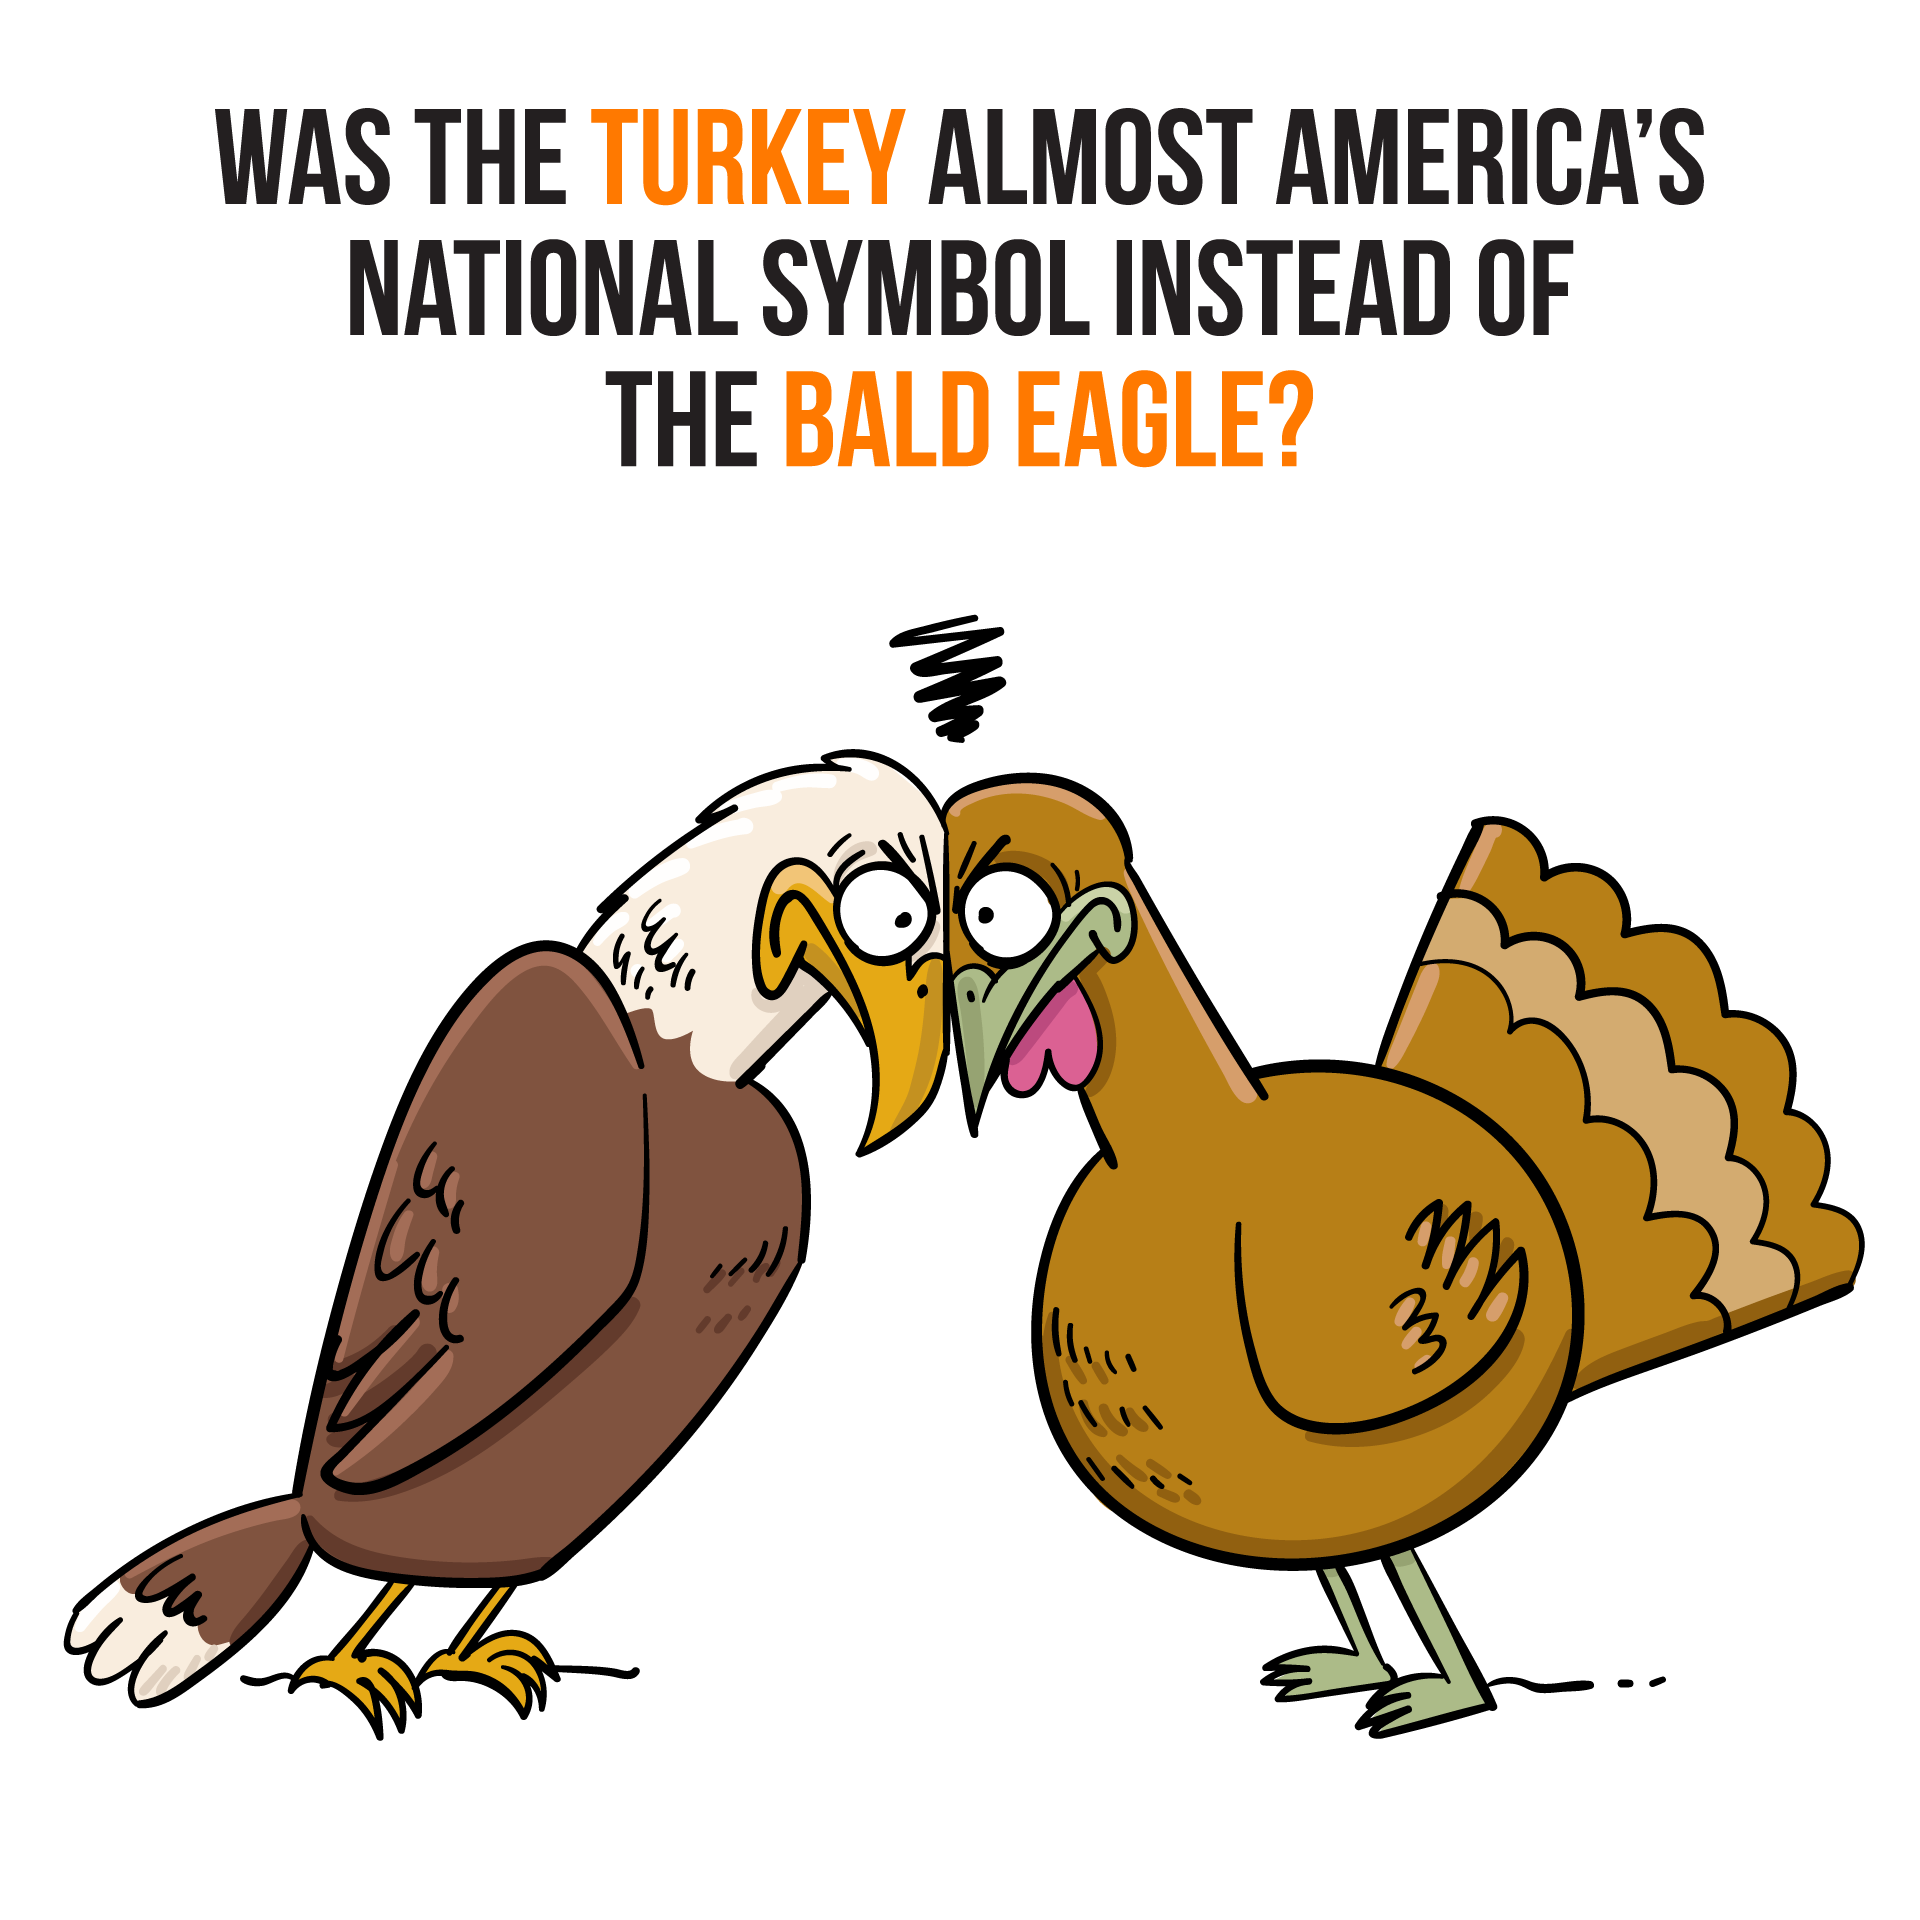 The Turkey Was Almost America's National Symbol Instead of the Bald Eagle